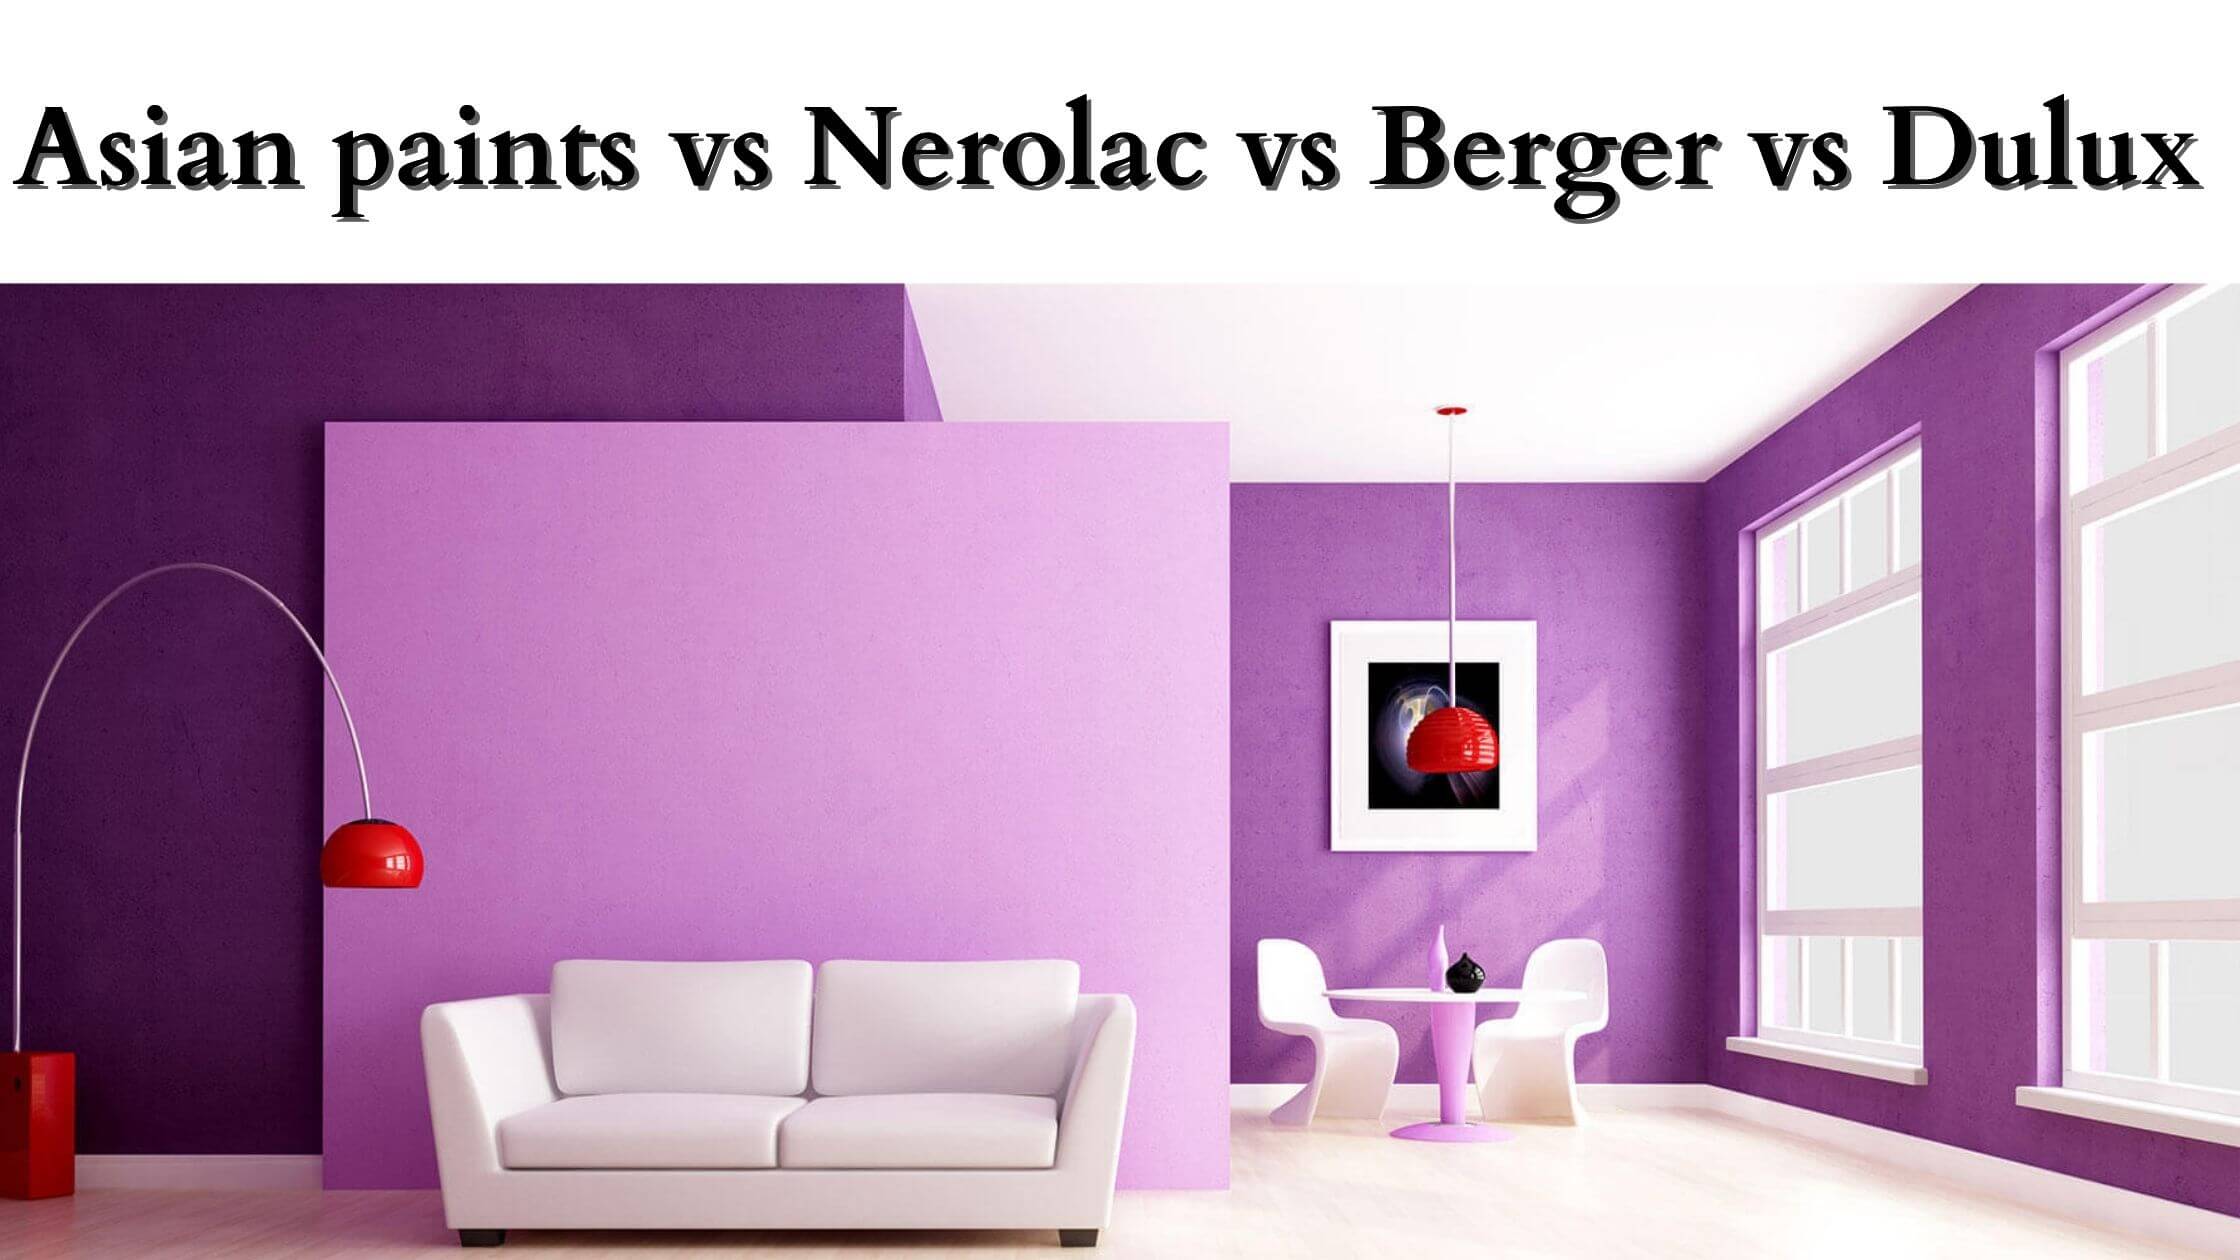 Asian Paints Vs Nerolac Vs Berger Vs Dulux - Which One Is Better